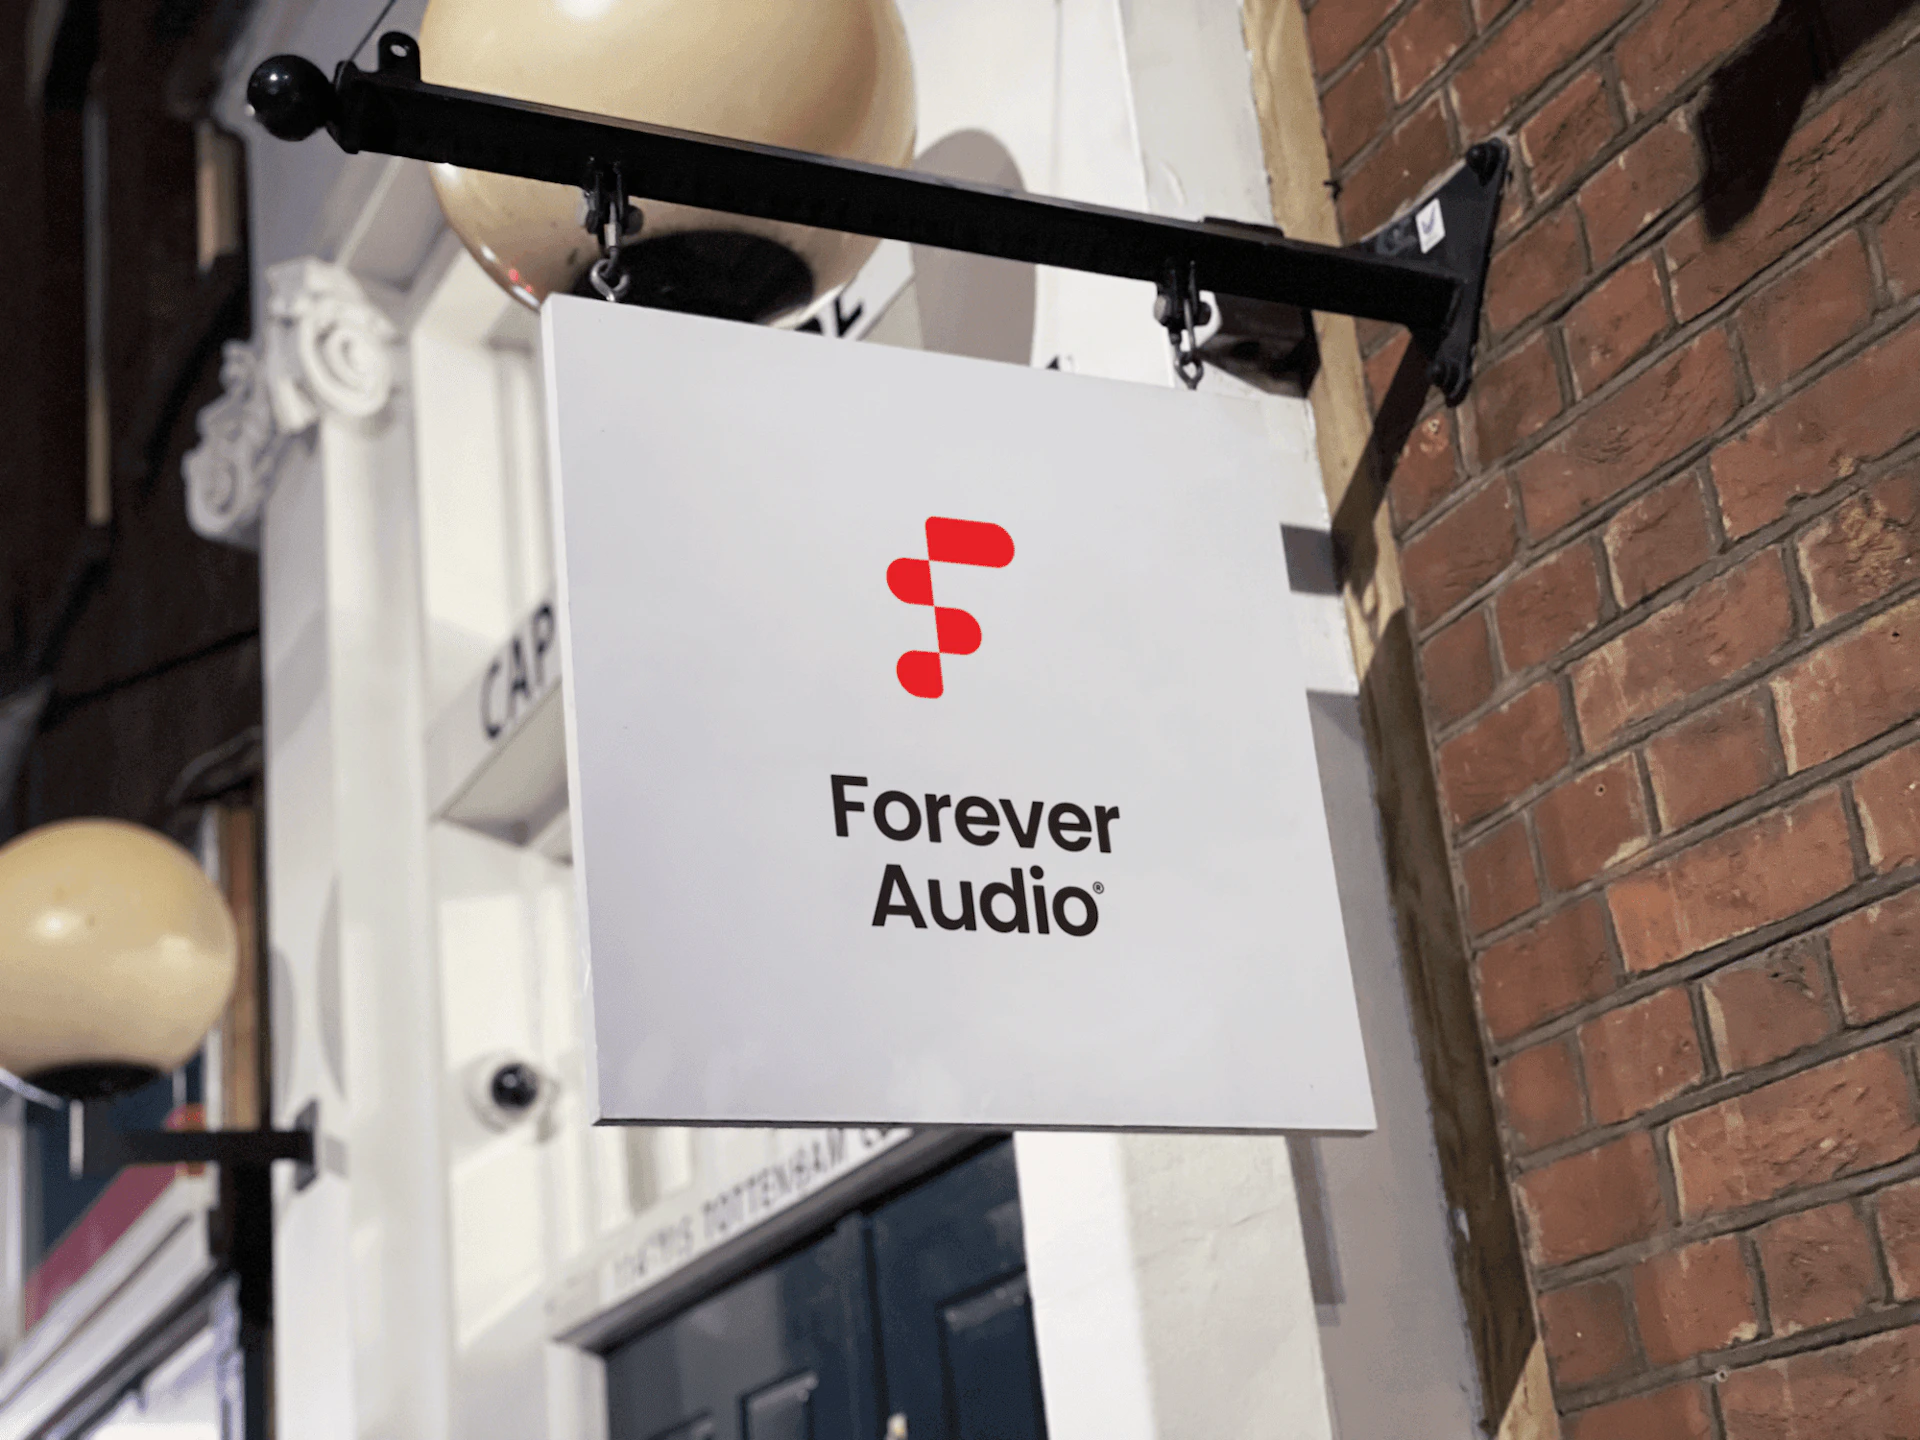 Forever Audio sign in street